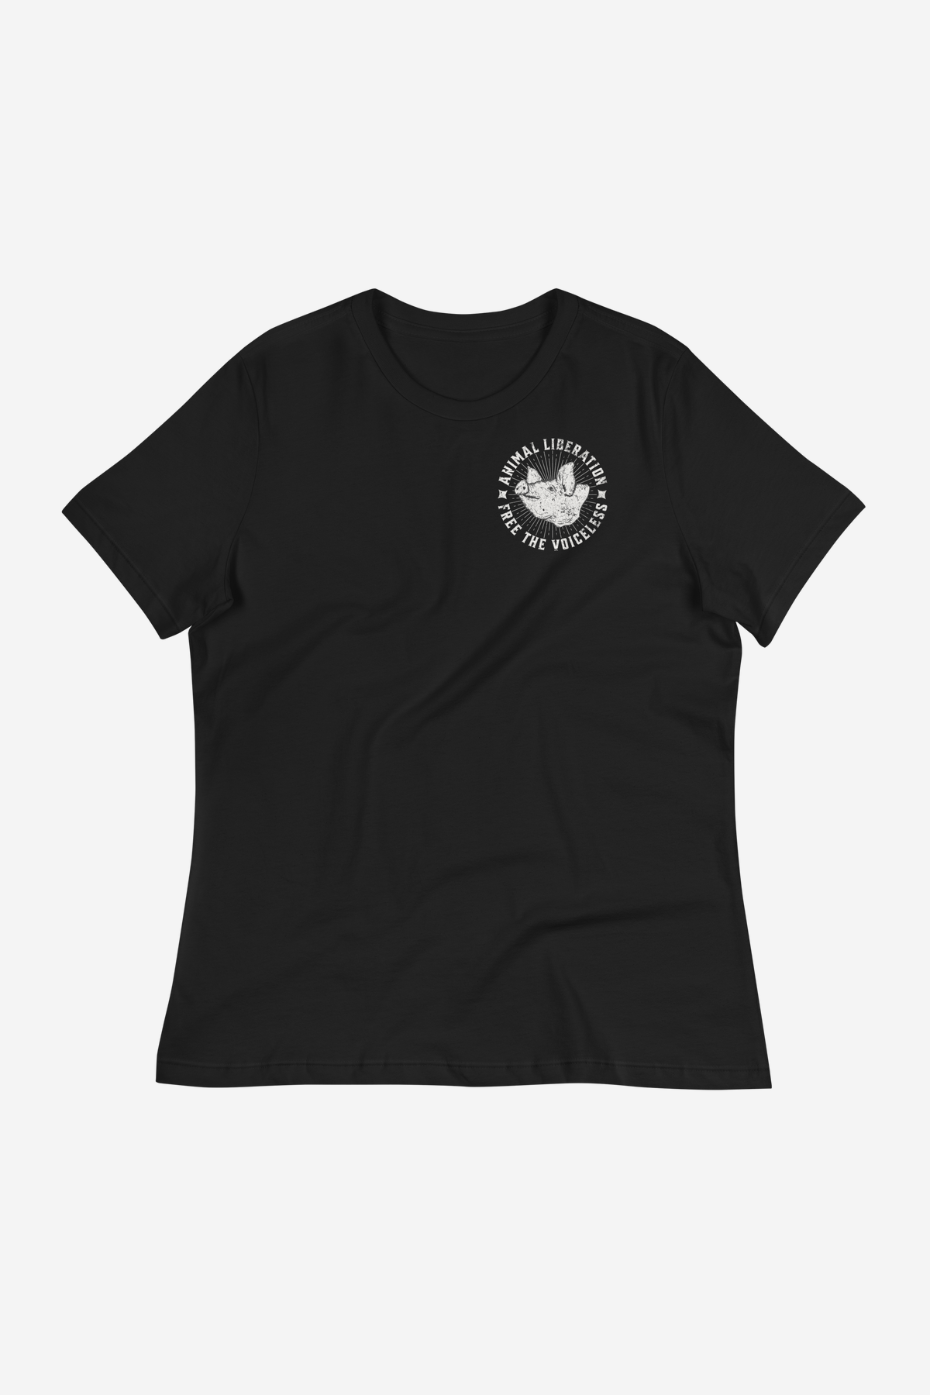 Free The Voiceless Women's Relaxed T-Shirt